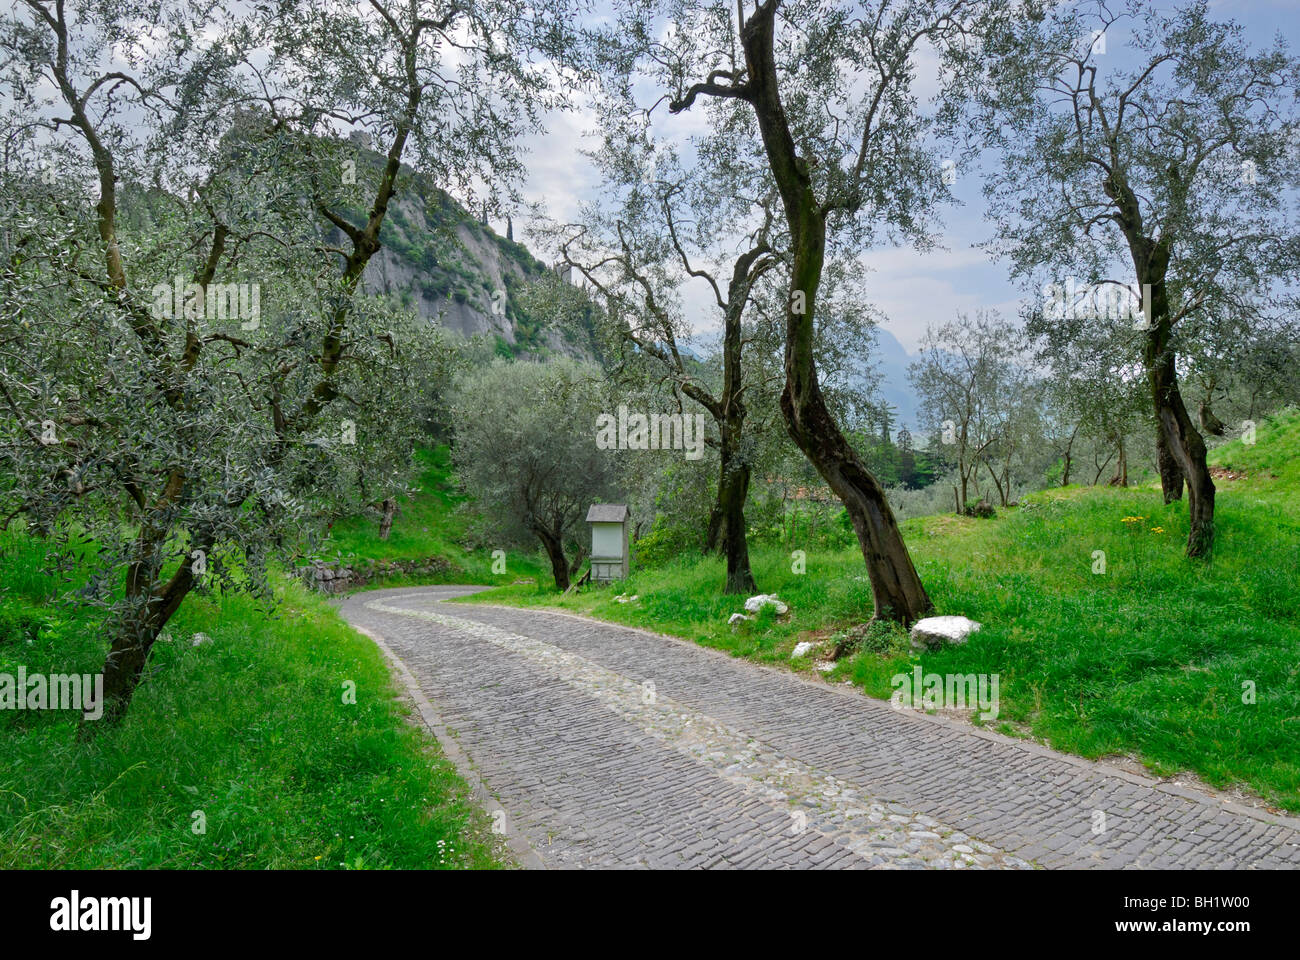 street through olive groove with Station of the Cross, Arco, Trentino, Italy Stock Photo